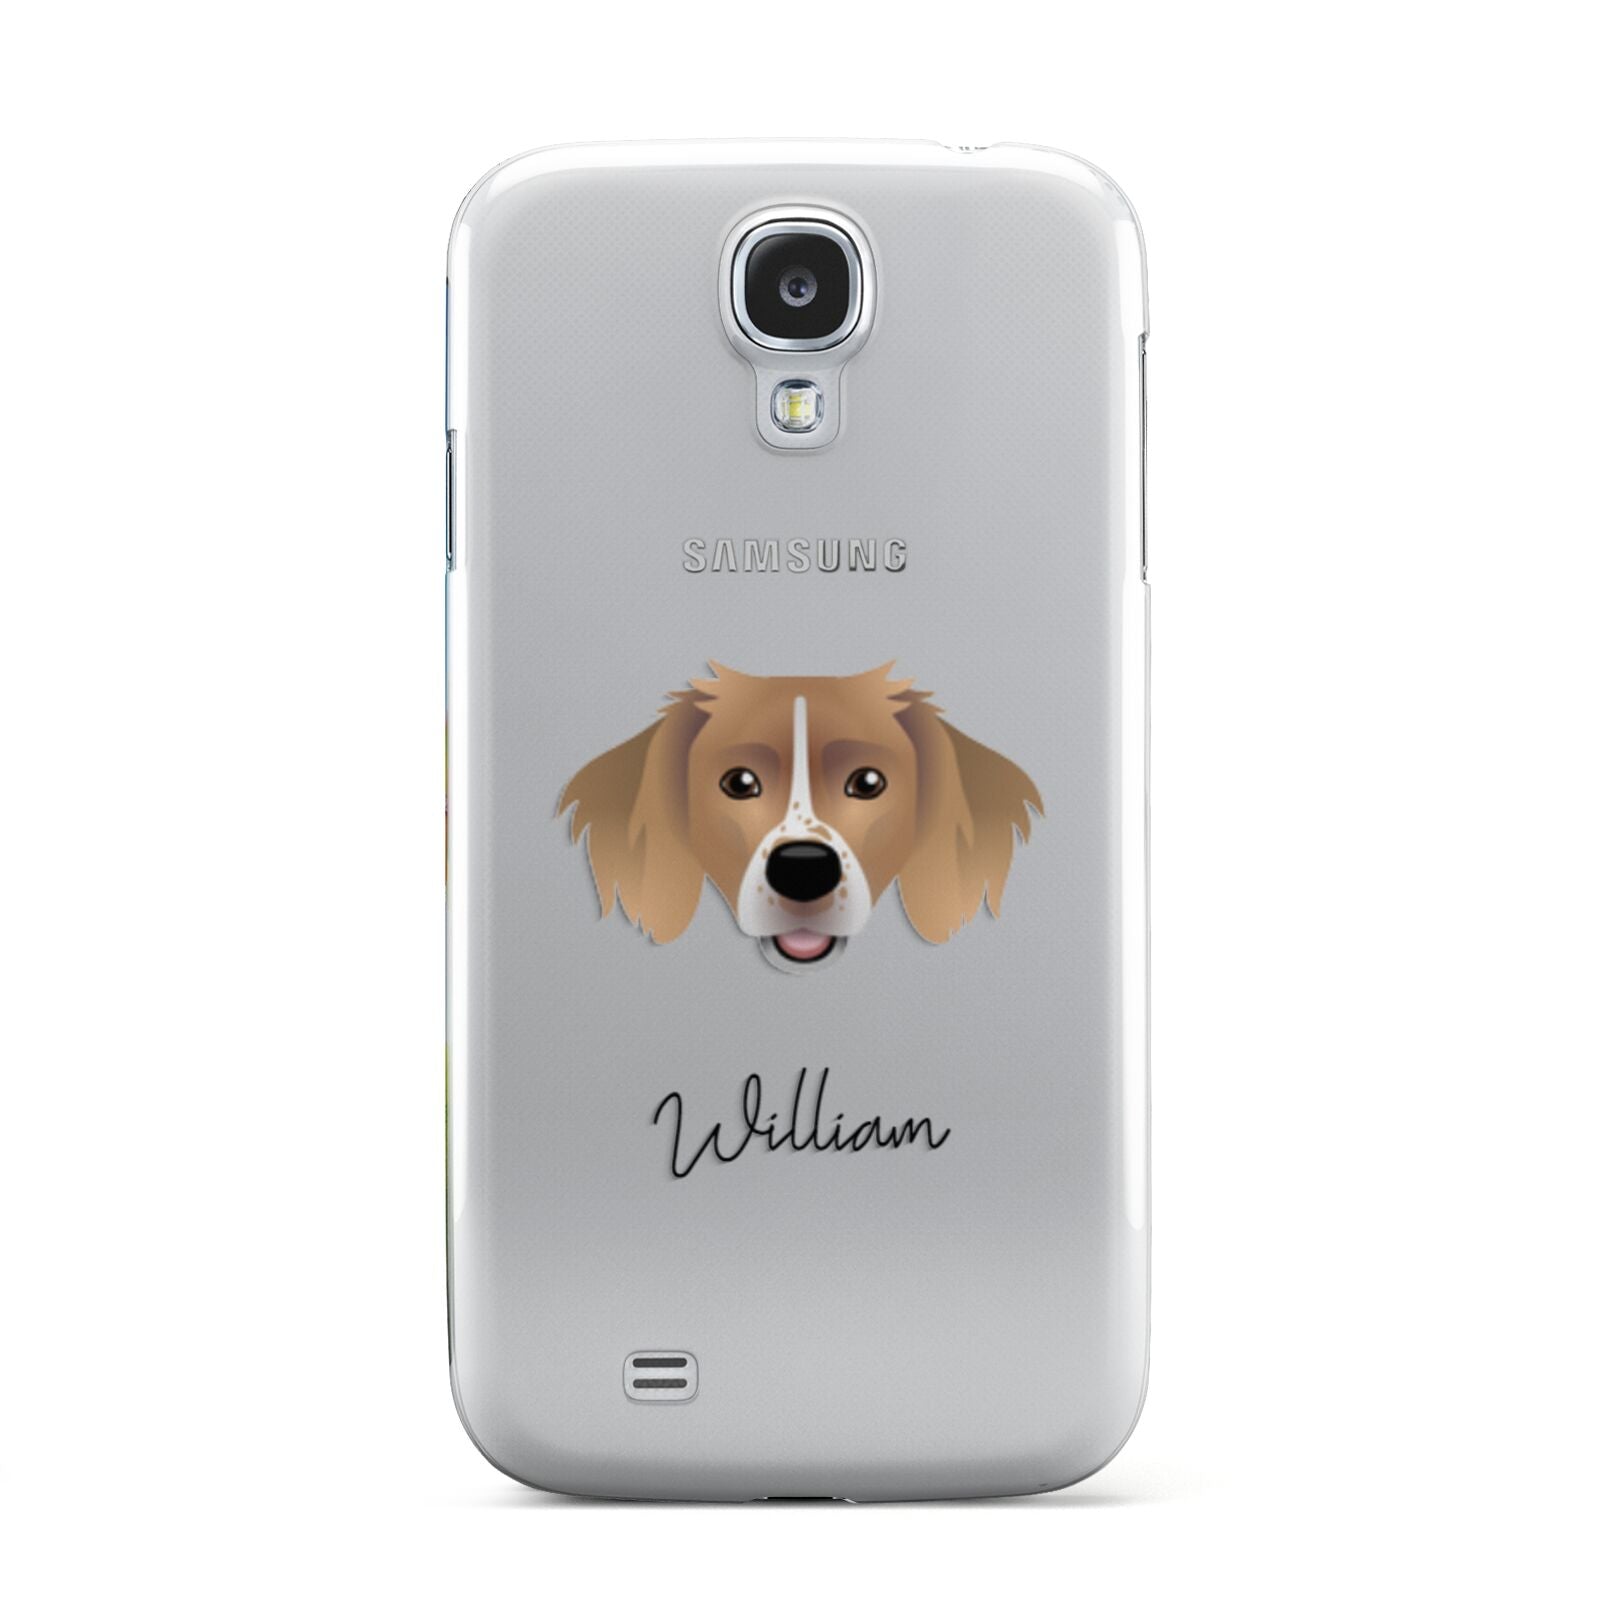 Sprollie Personalised Samsung Galaxy S4 Case